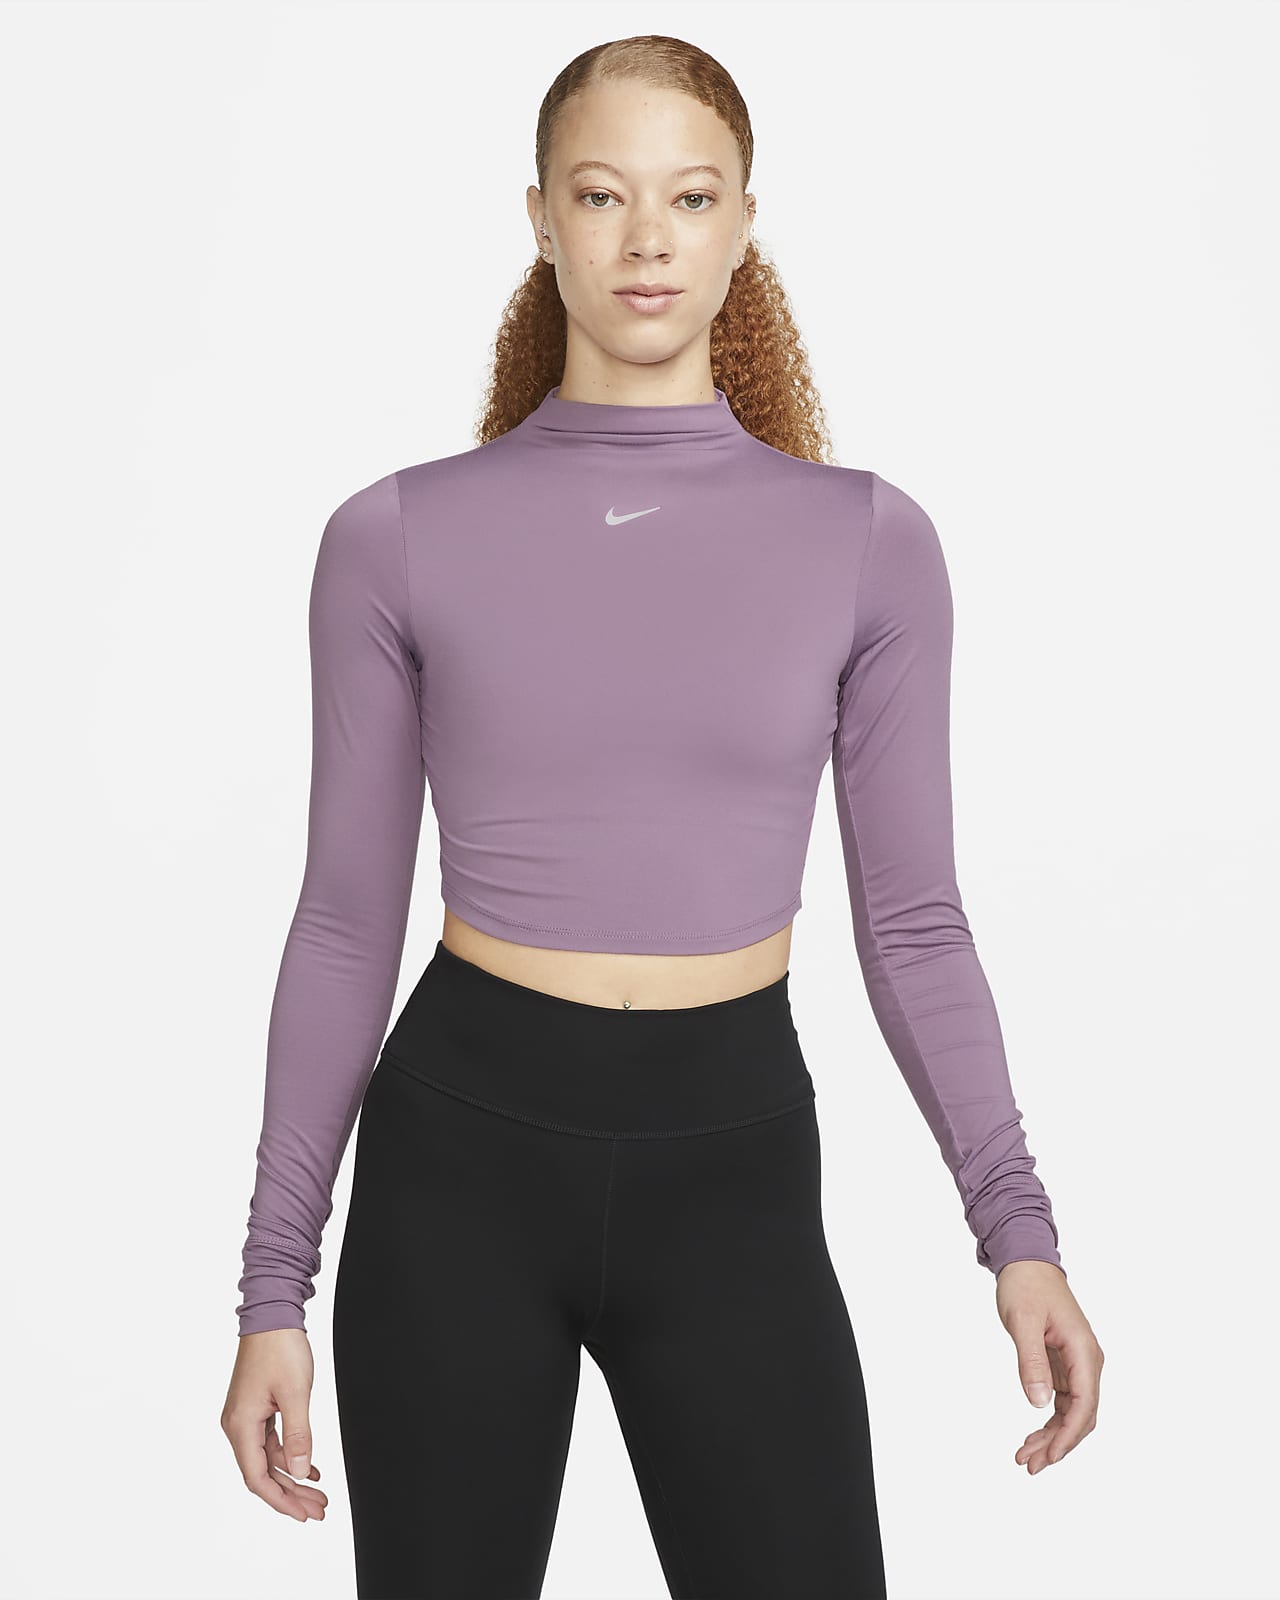 Women's Nike One Luxe Dri-FIT Long Sleeve Fit Top